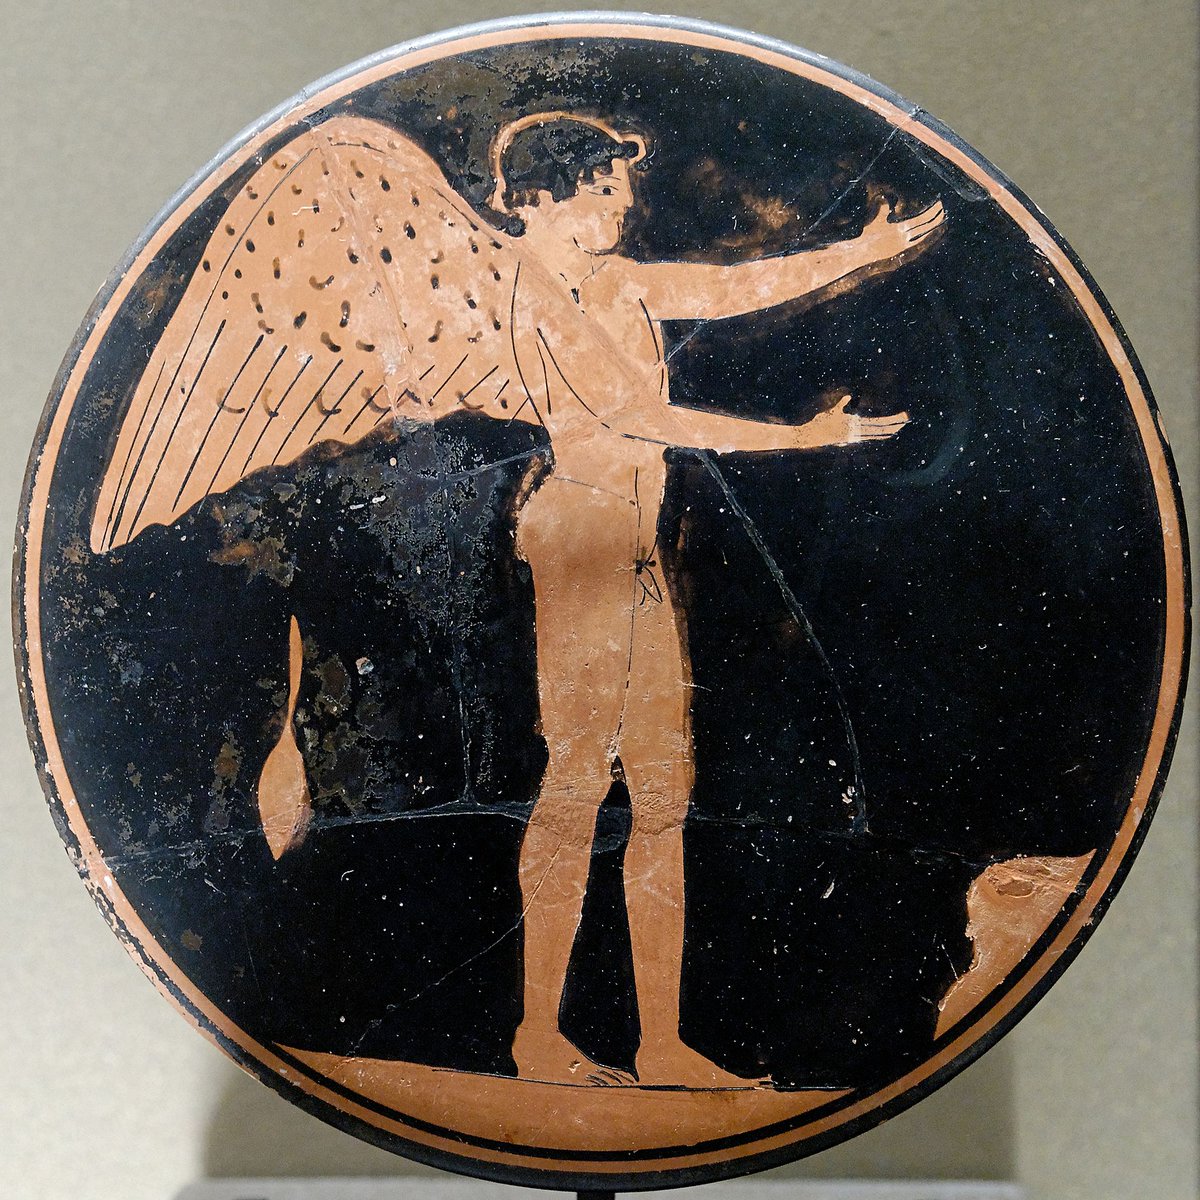 12. EROS- god of love- greek counterpart of cupid but less known, rip, he deserves better- sometimes also associated with homosexual love, he said gay rights- therefore we have no choice but to stan